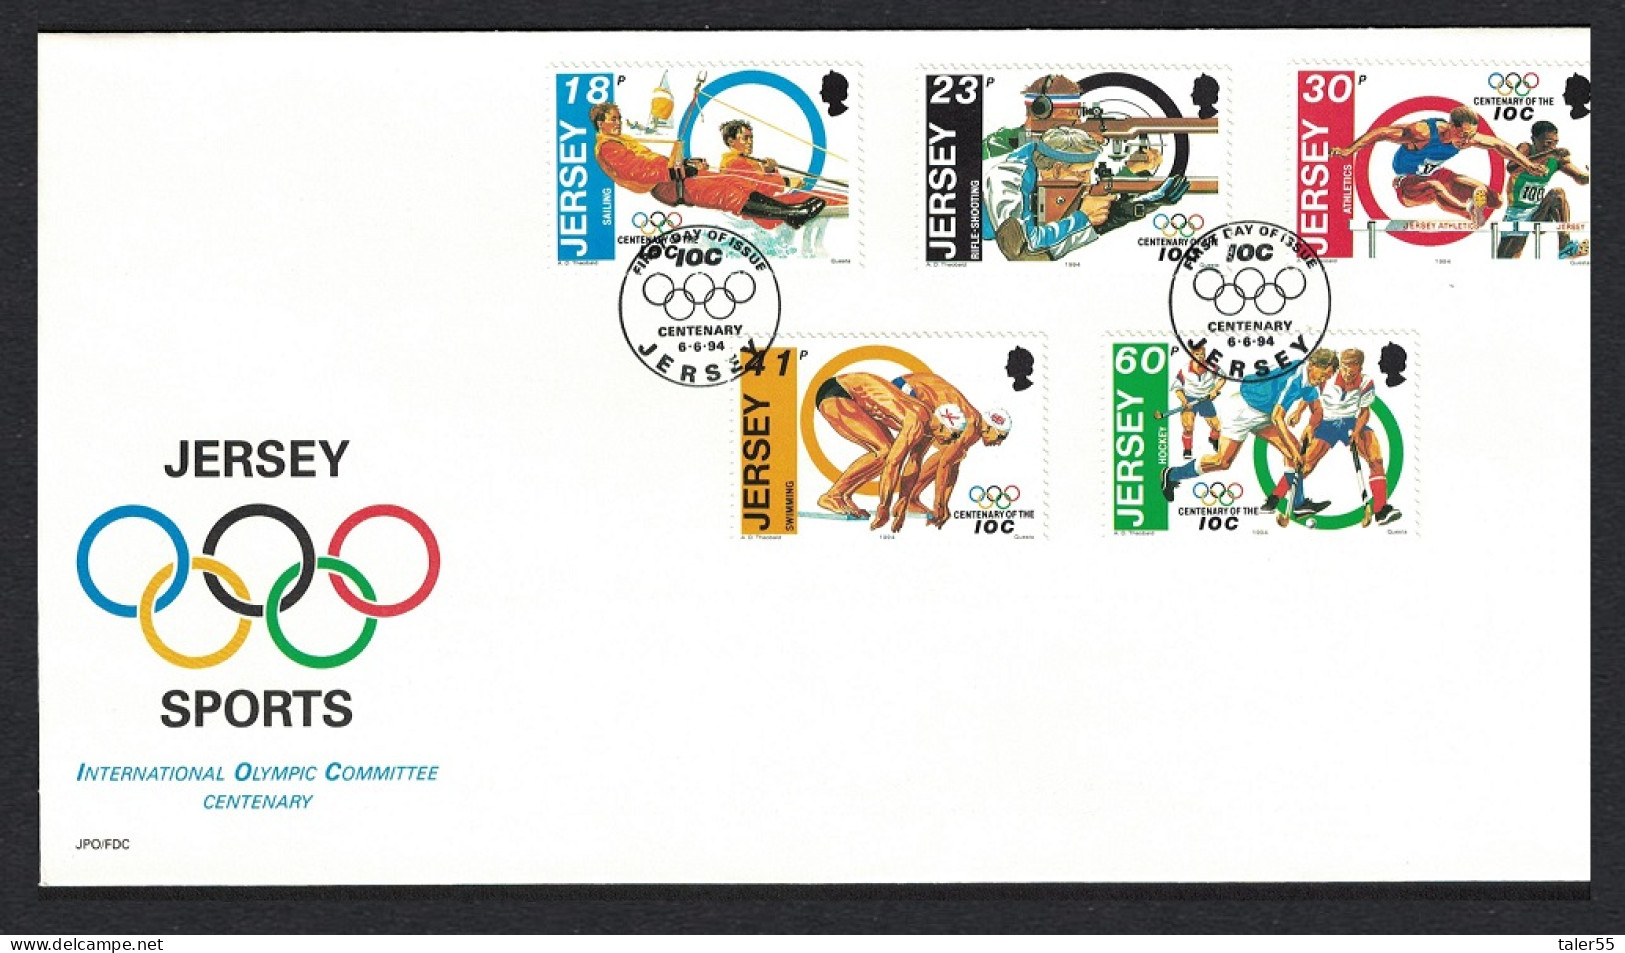 Jersey International Olympic Committee FDC 1994 SG#665-669 - Jersey